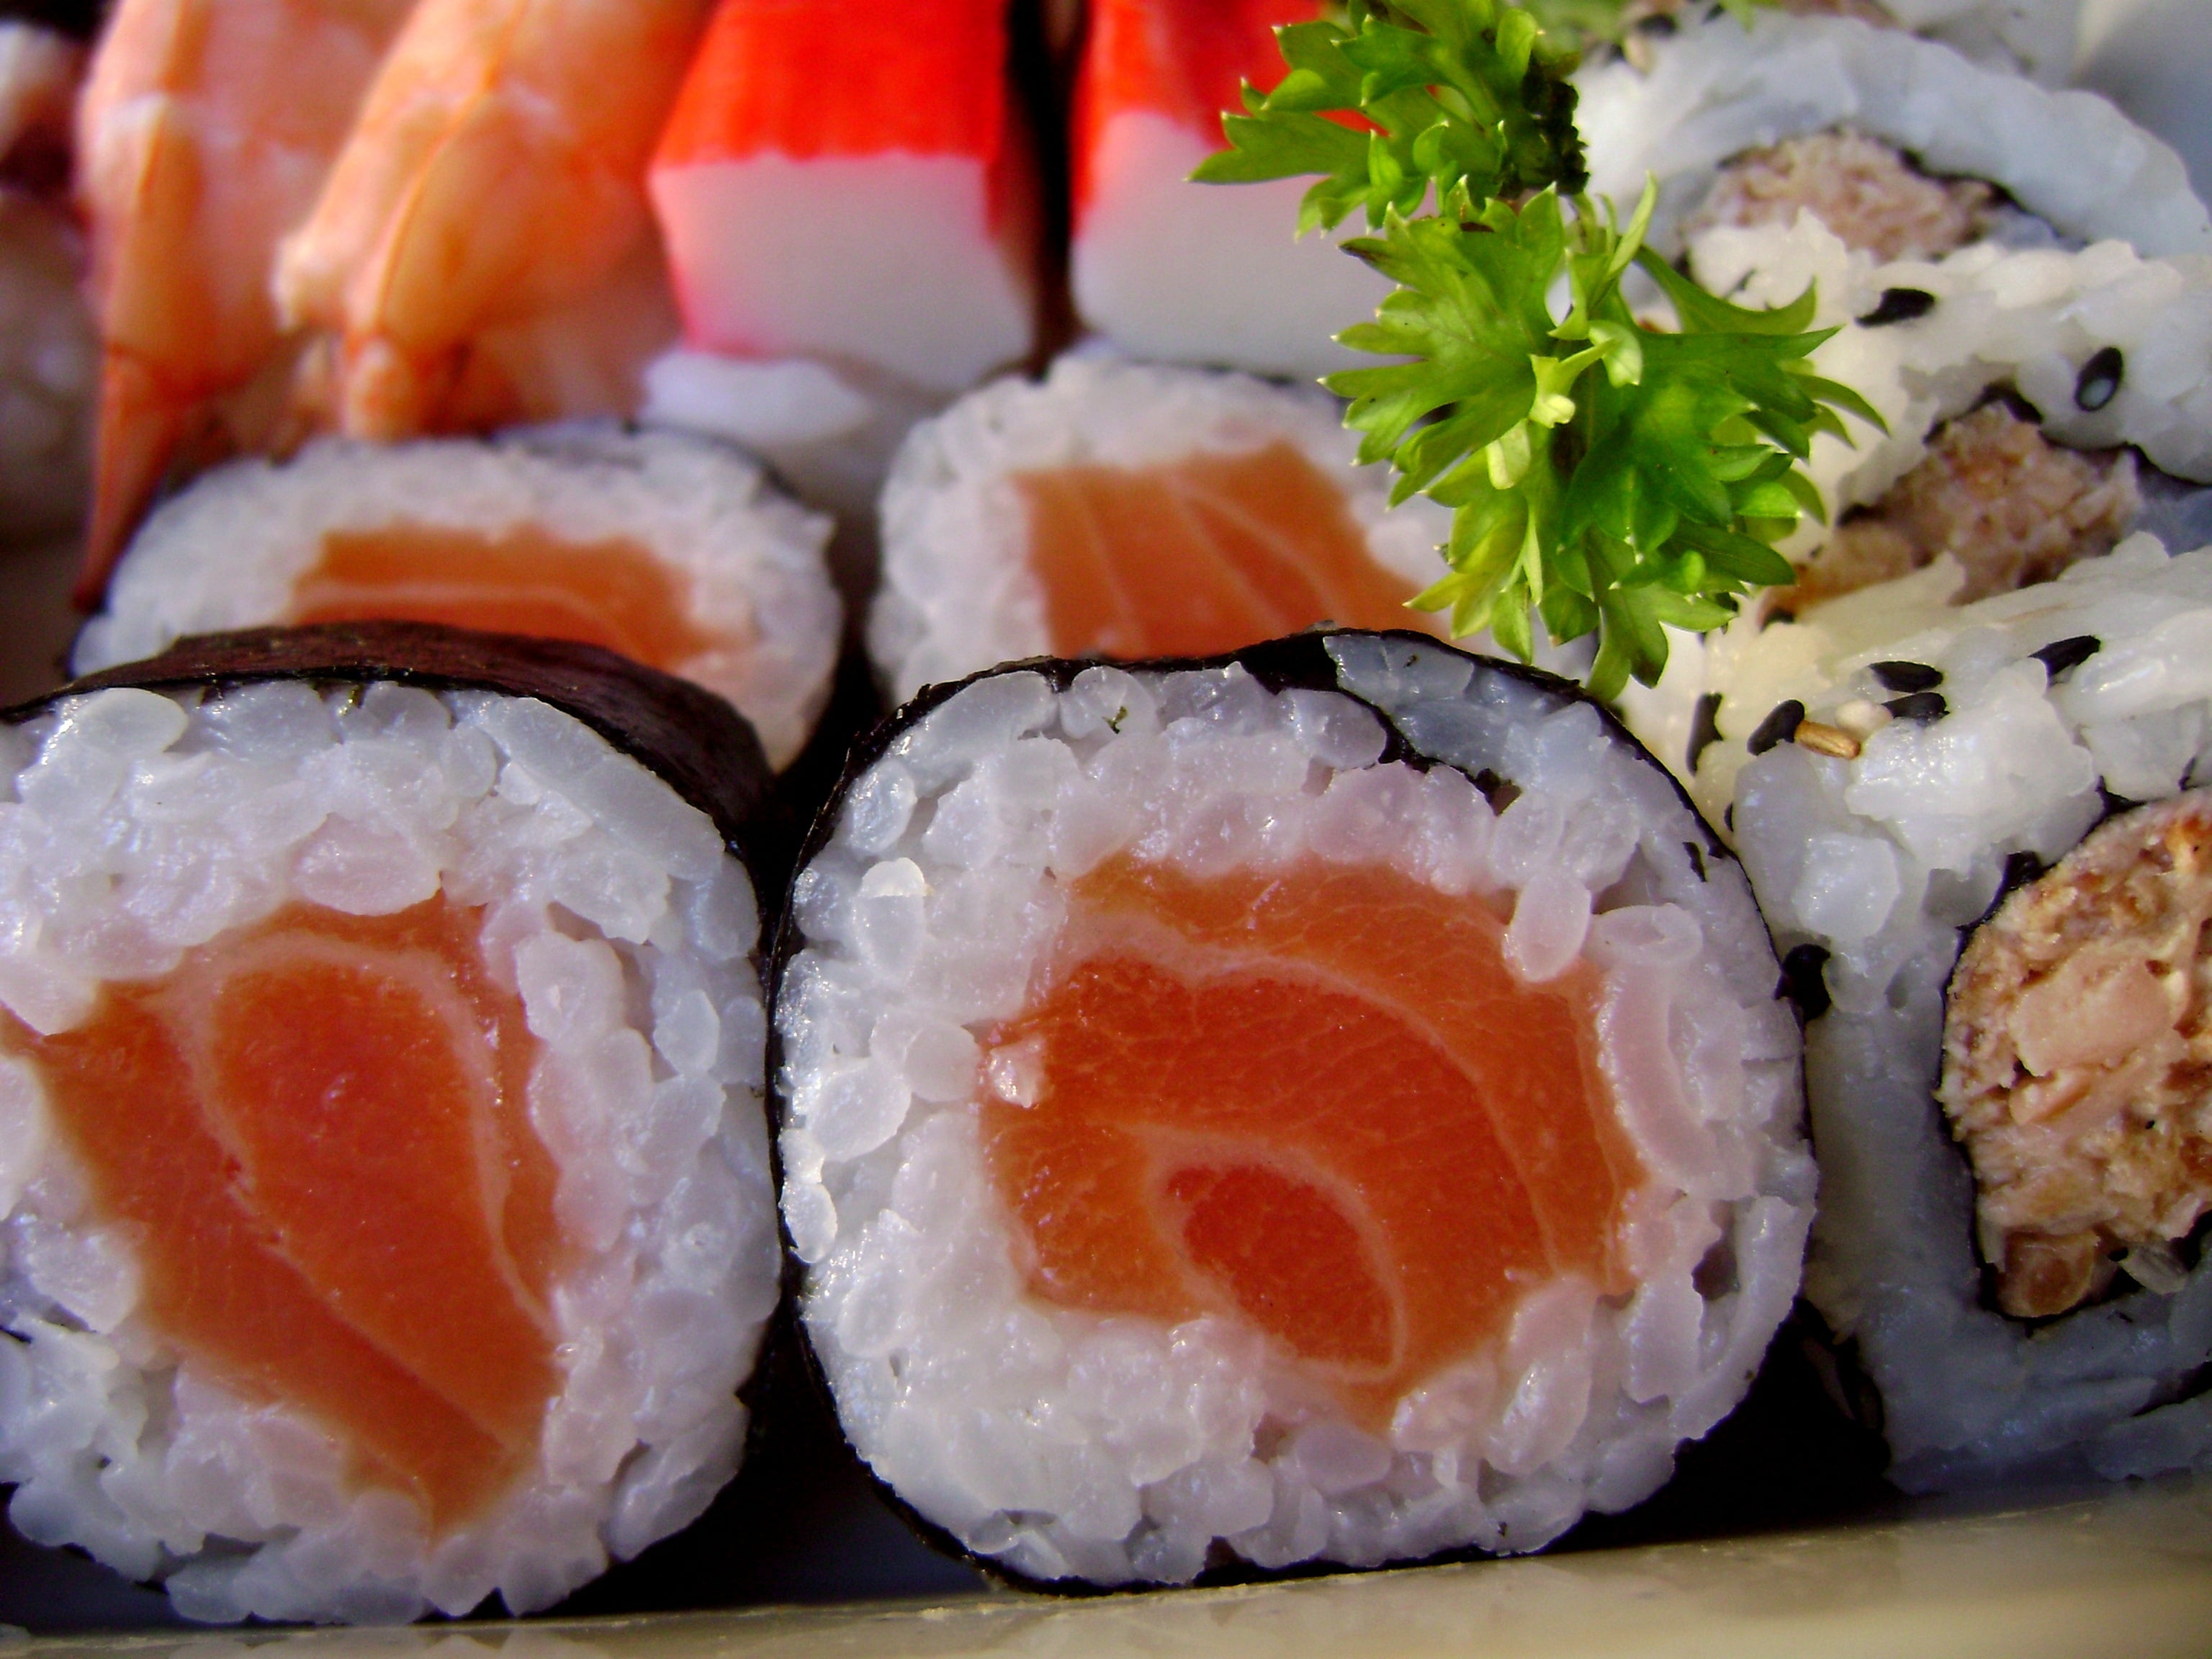 Wallpapers sushi rice ete on the desktop